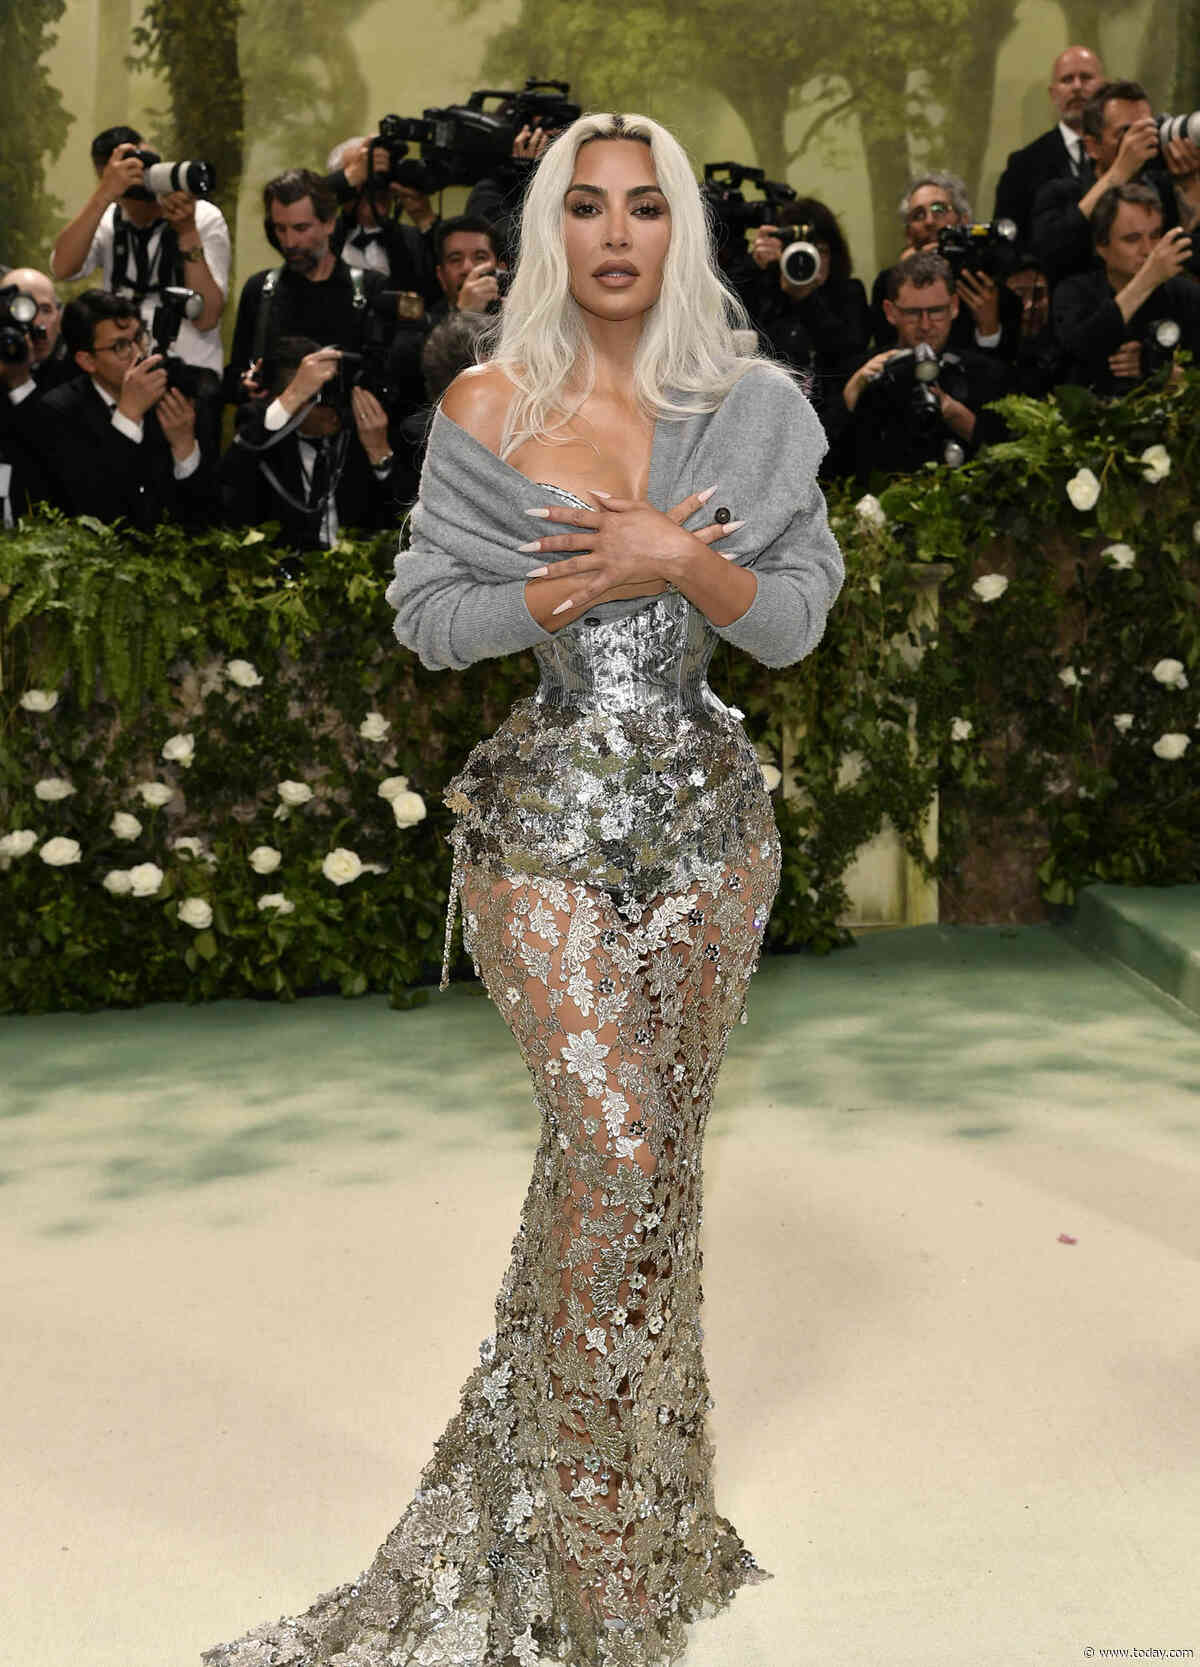 Fans are divided over Kim Kardashian’s Met Gala sweater. She explains why she wore it